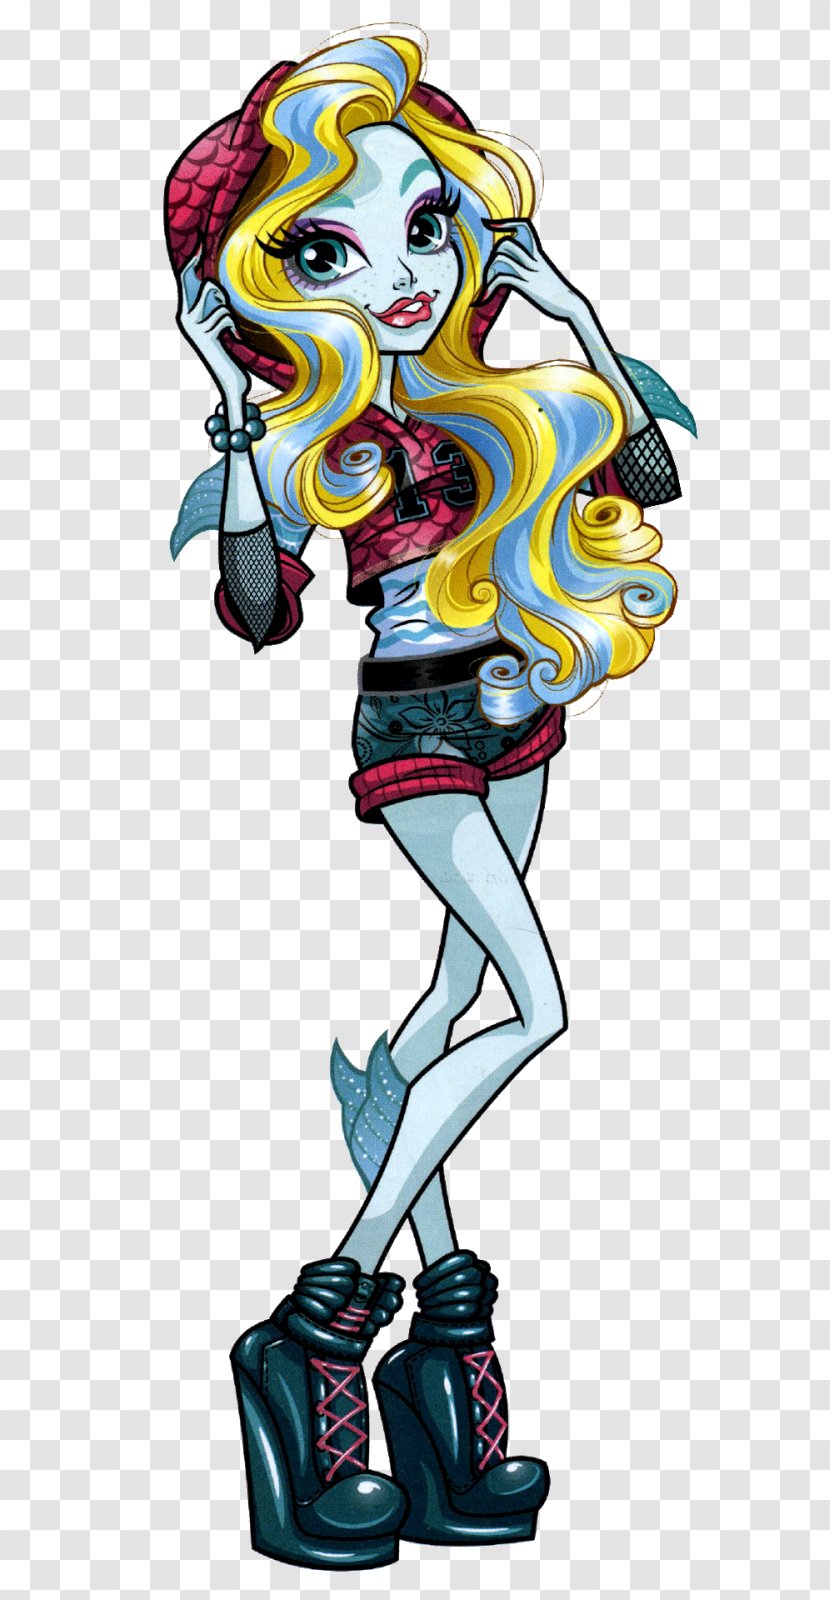 Lagoona Blue Cleo DeNile Draculaura Monster High Doll - Ever After - Mo Nsterhigh Transparent PNG